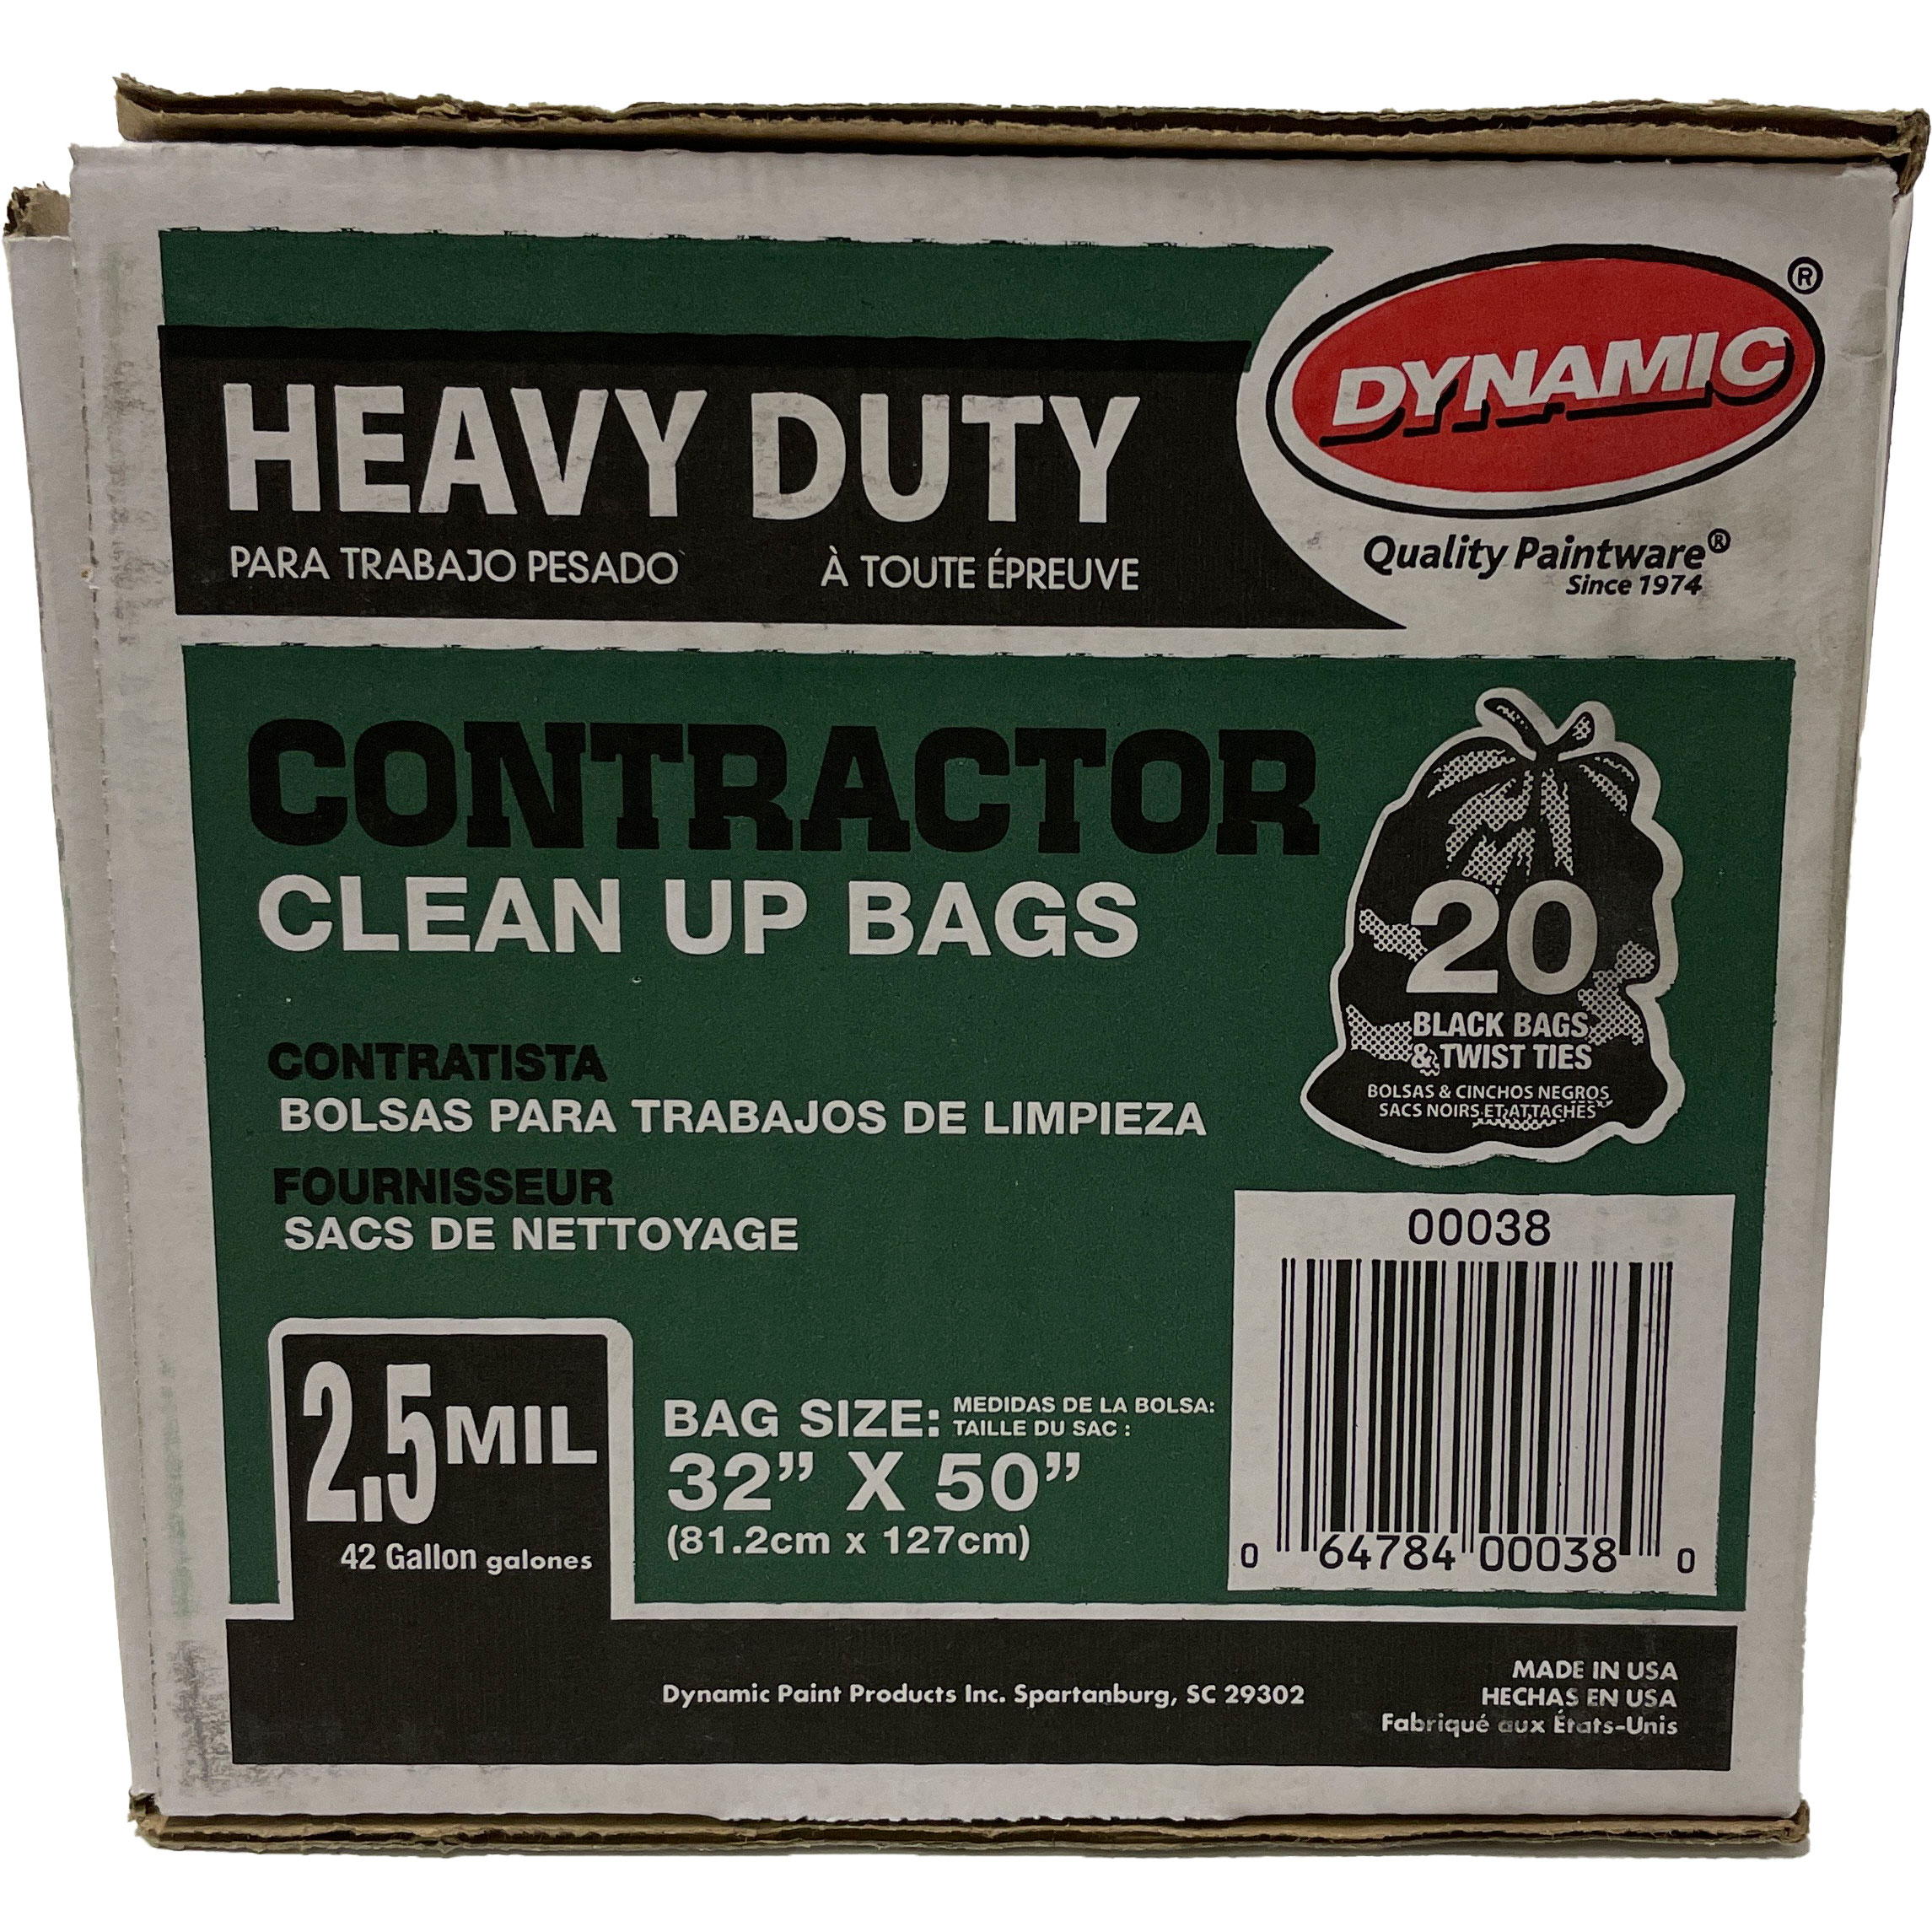 Dynamic 00038 Heavy Duty Black Contractor Bags, 42 Gallon, 2.5mil, 32 x 50,  20 Bags w/ Twist Ties [BAGS00038] - $14.99 : Norkan Industrial Supply,  Abatement Supplies, Concrete Restoration, High performance Coatings &  Safety Equipment